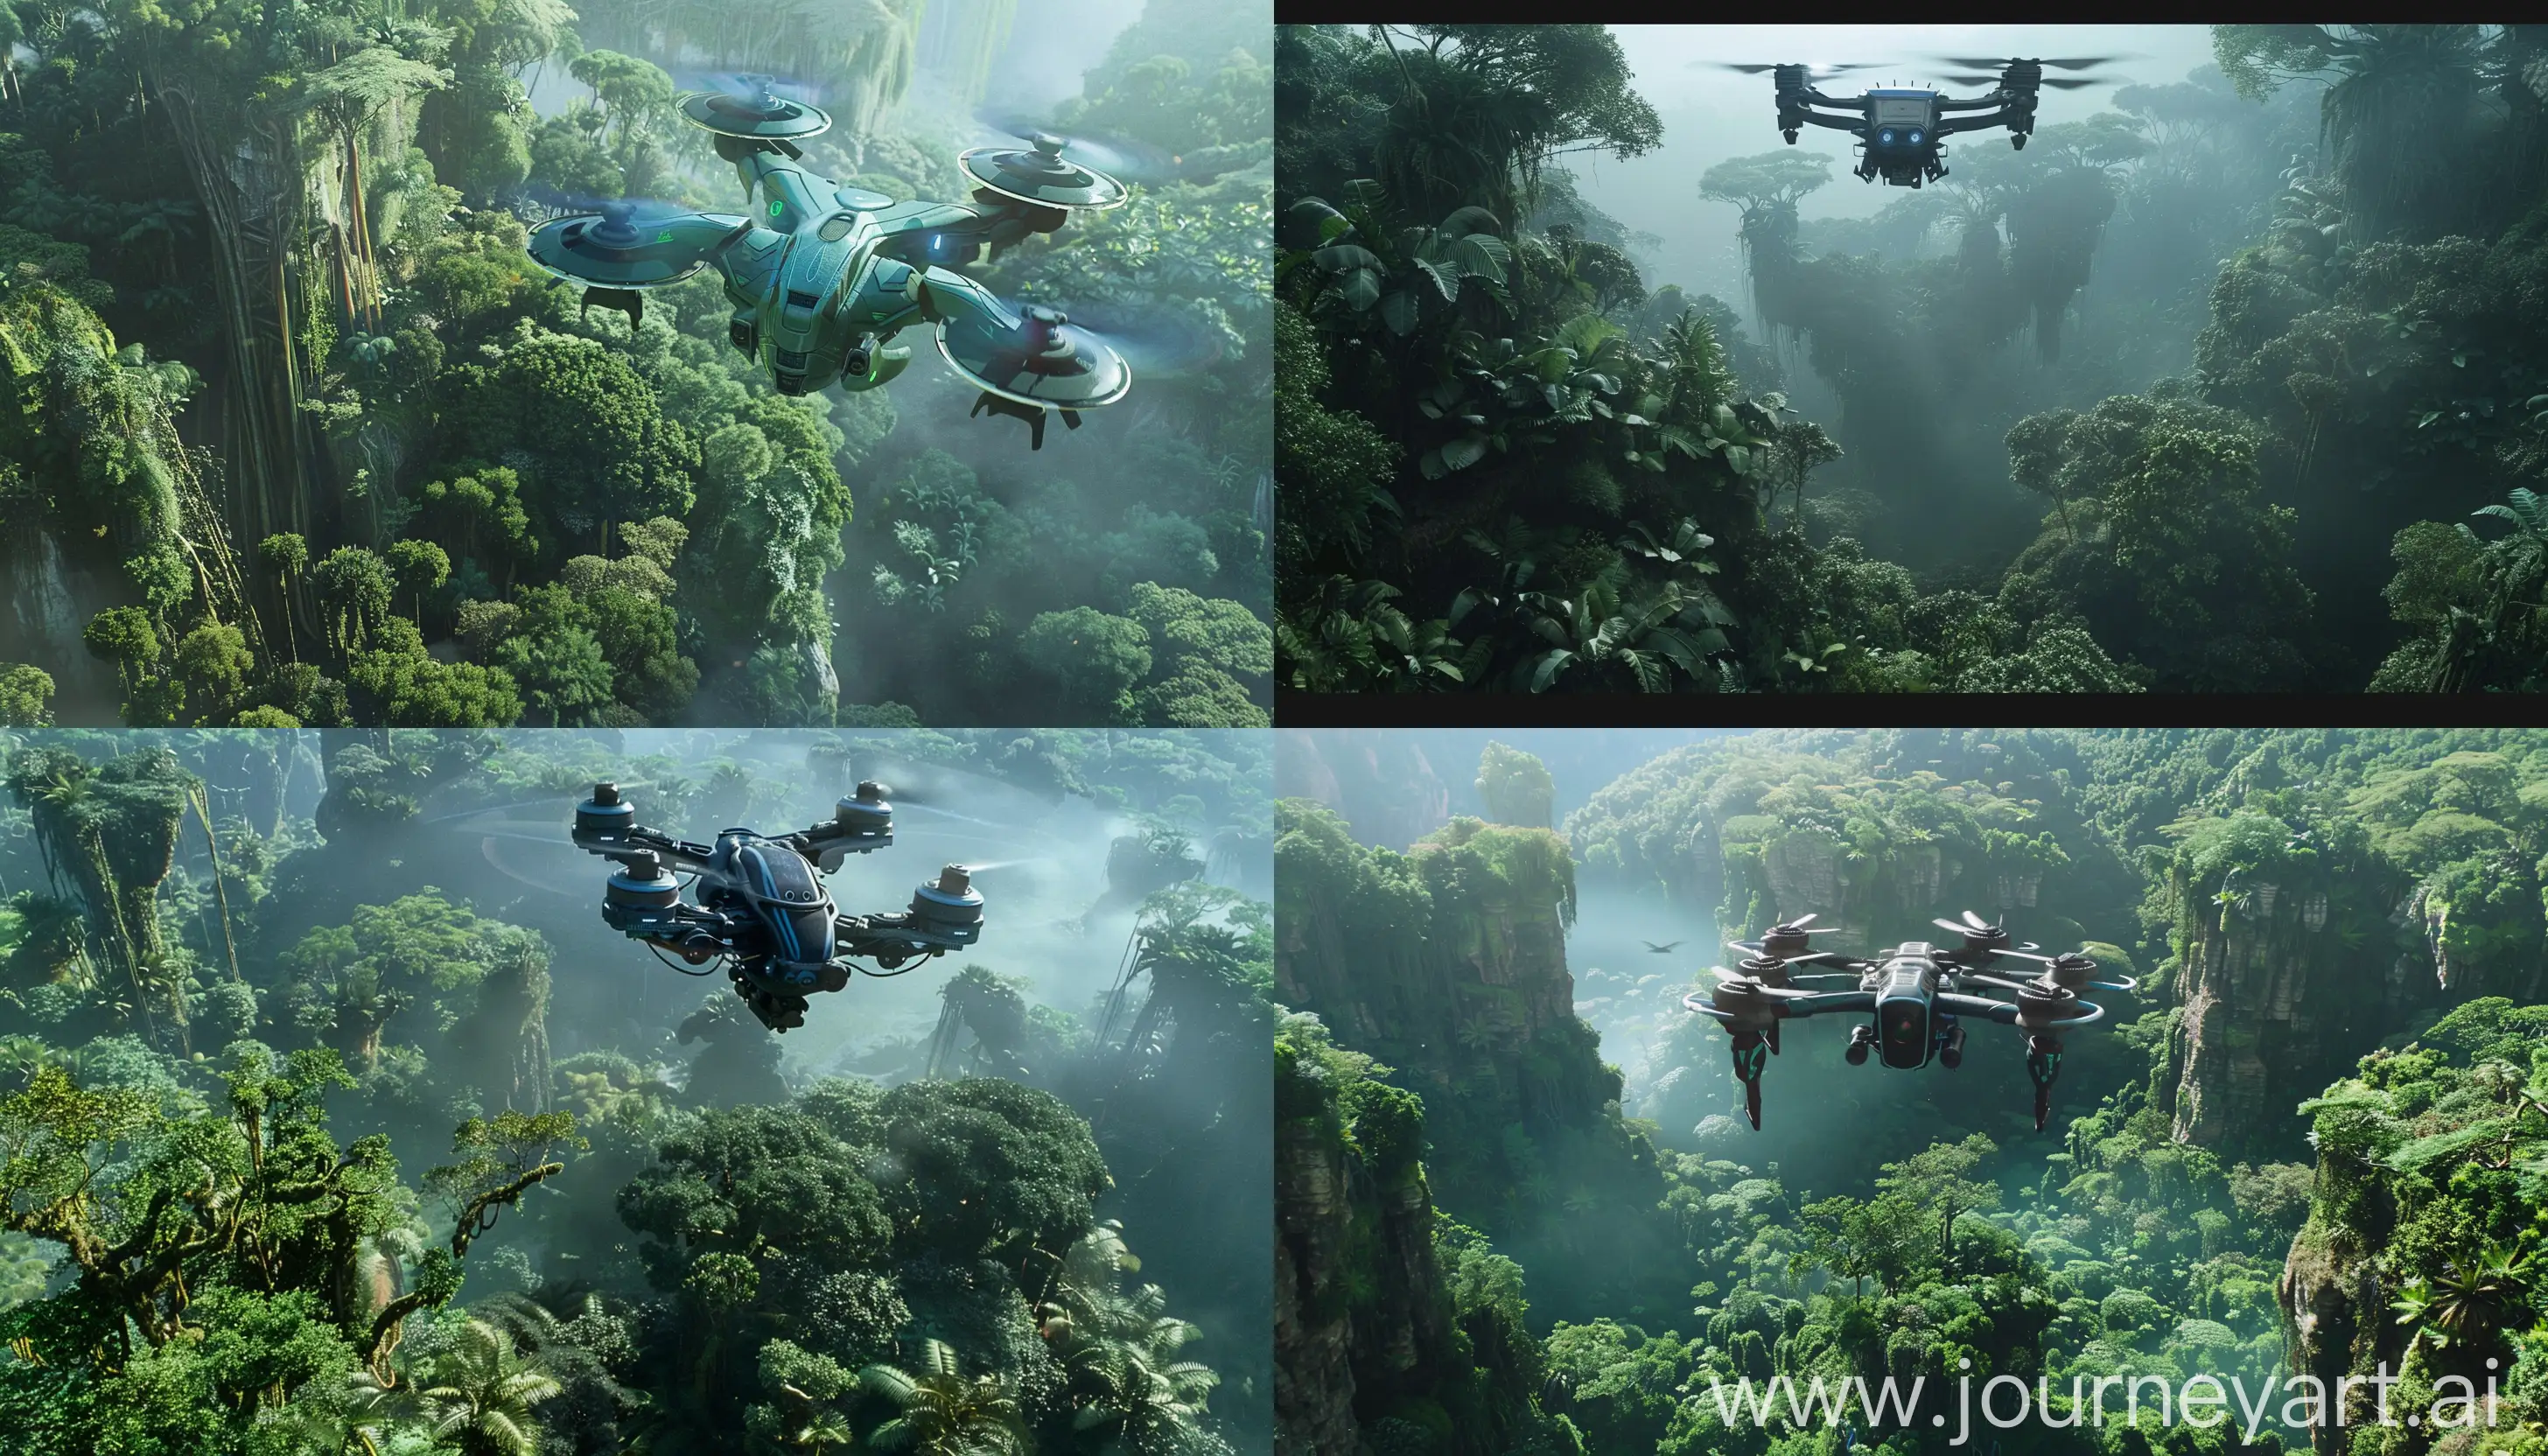 Jake-Sully-Soars-Over-Pandoras-Enchanting-Forest-in-Stunning-Aerial-Shot